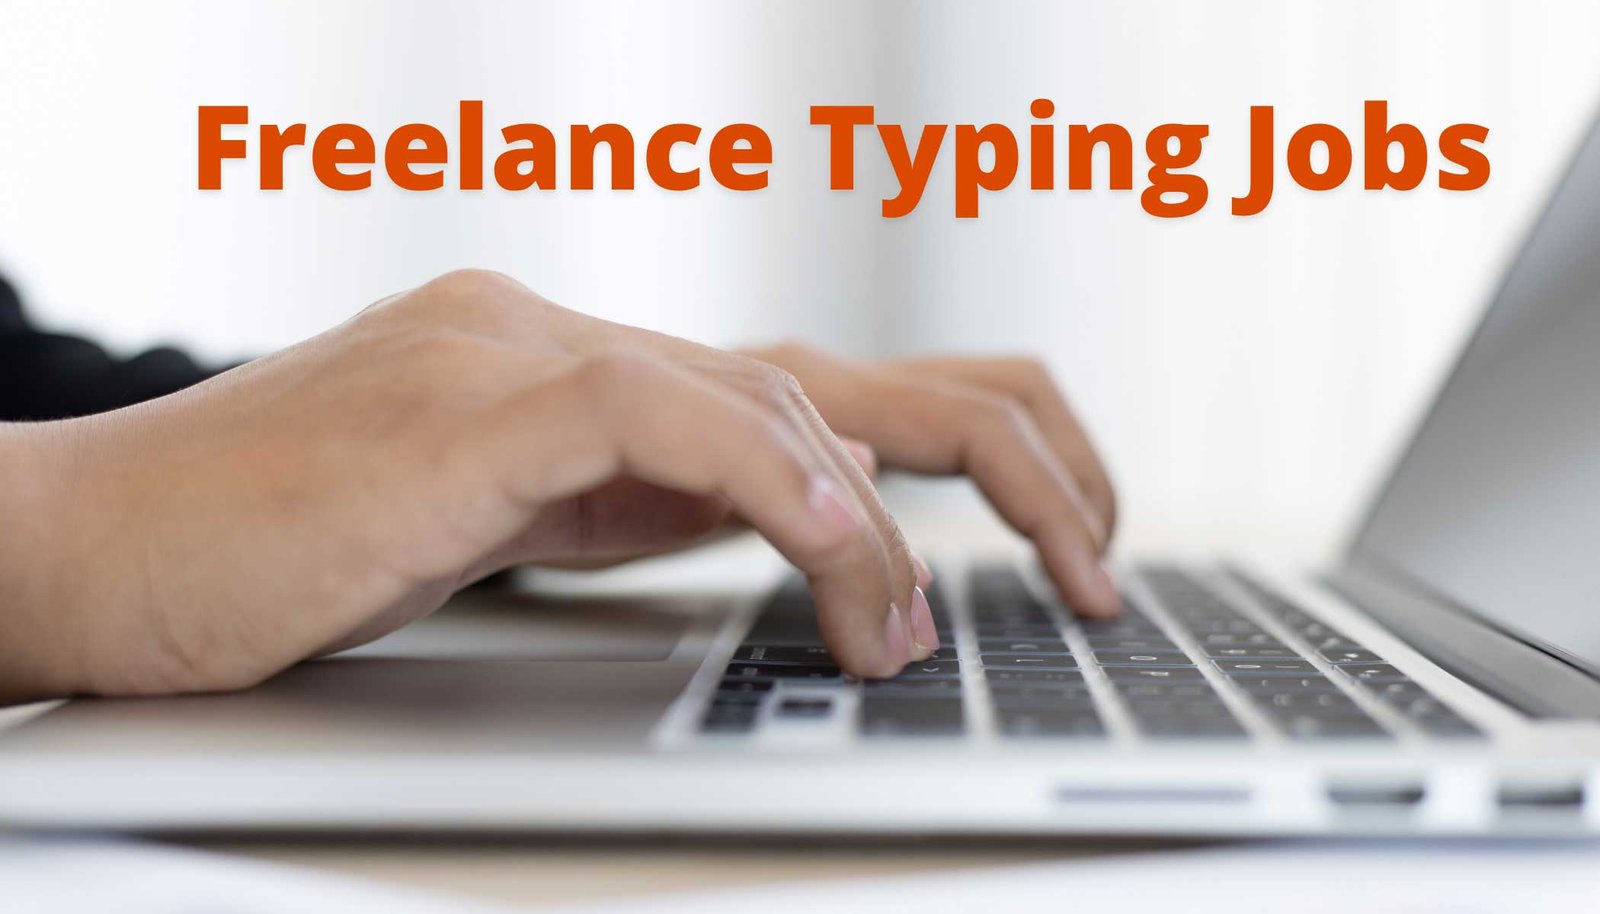 Freelance-Typing-Jobs-For-Beginners